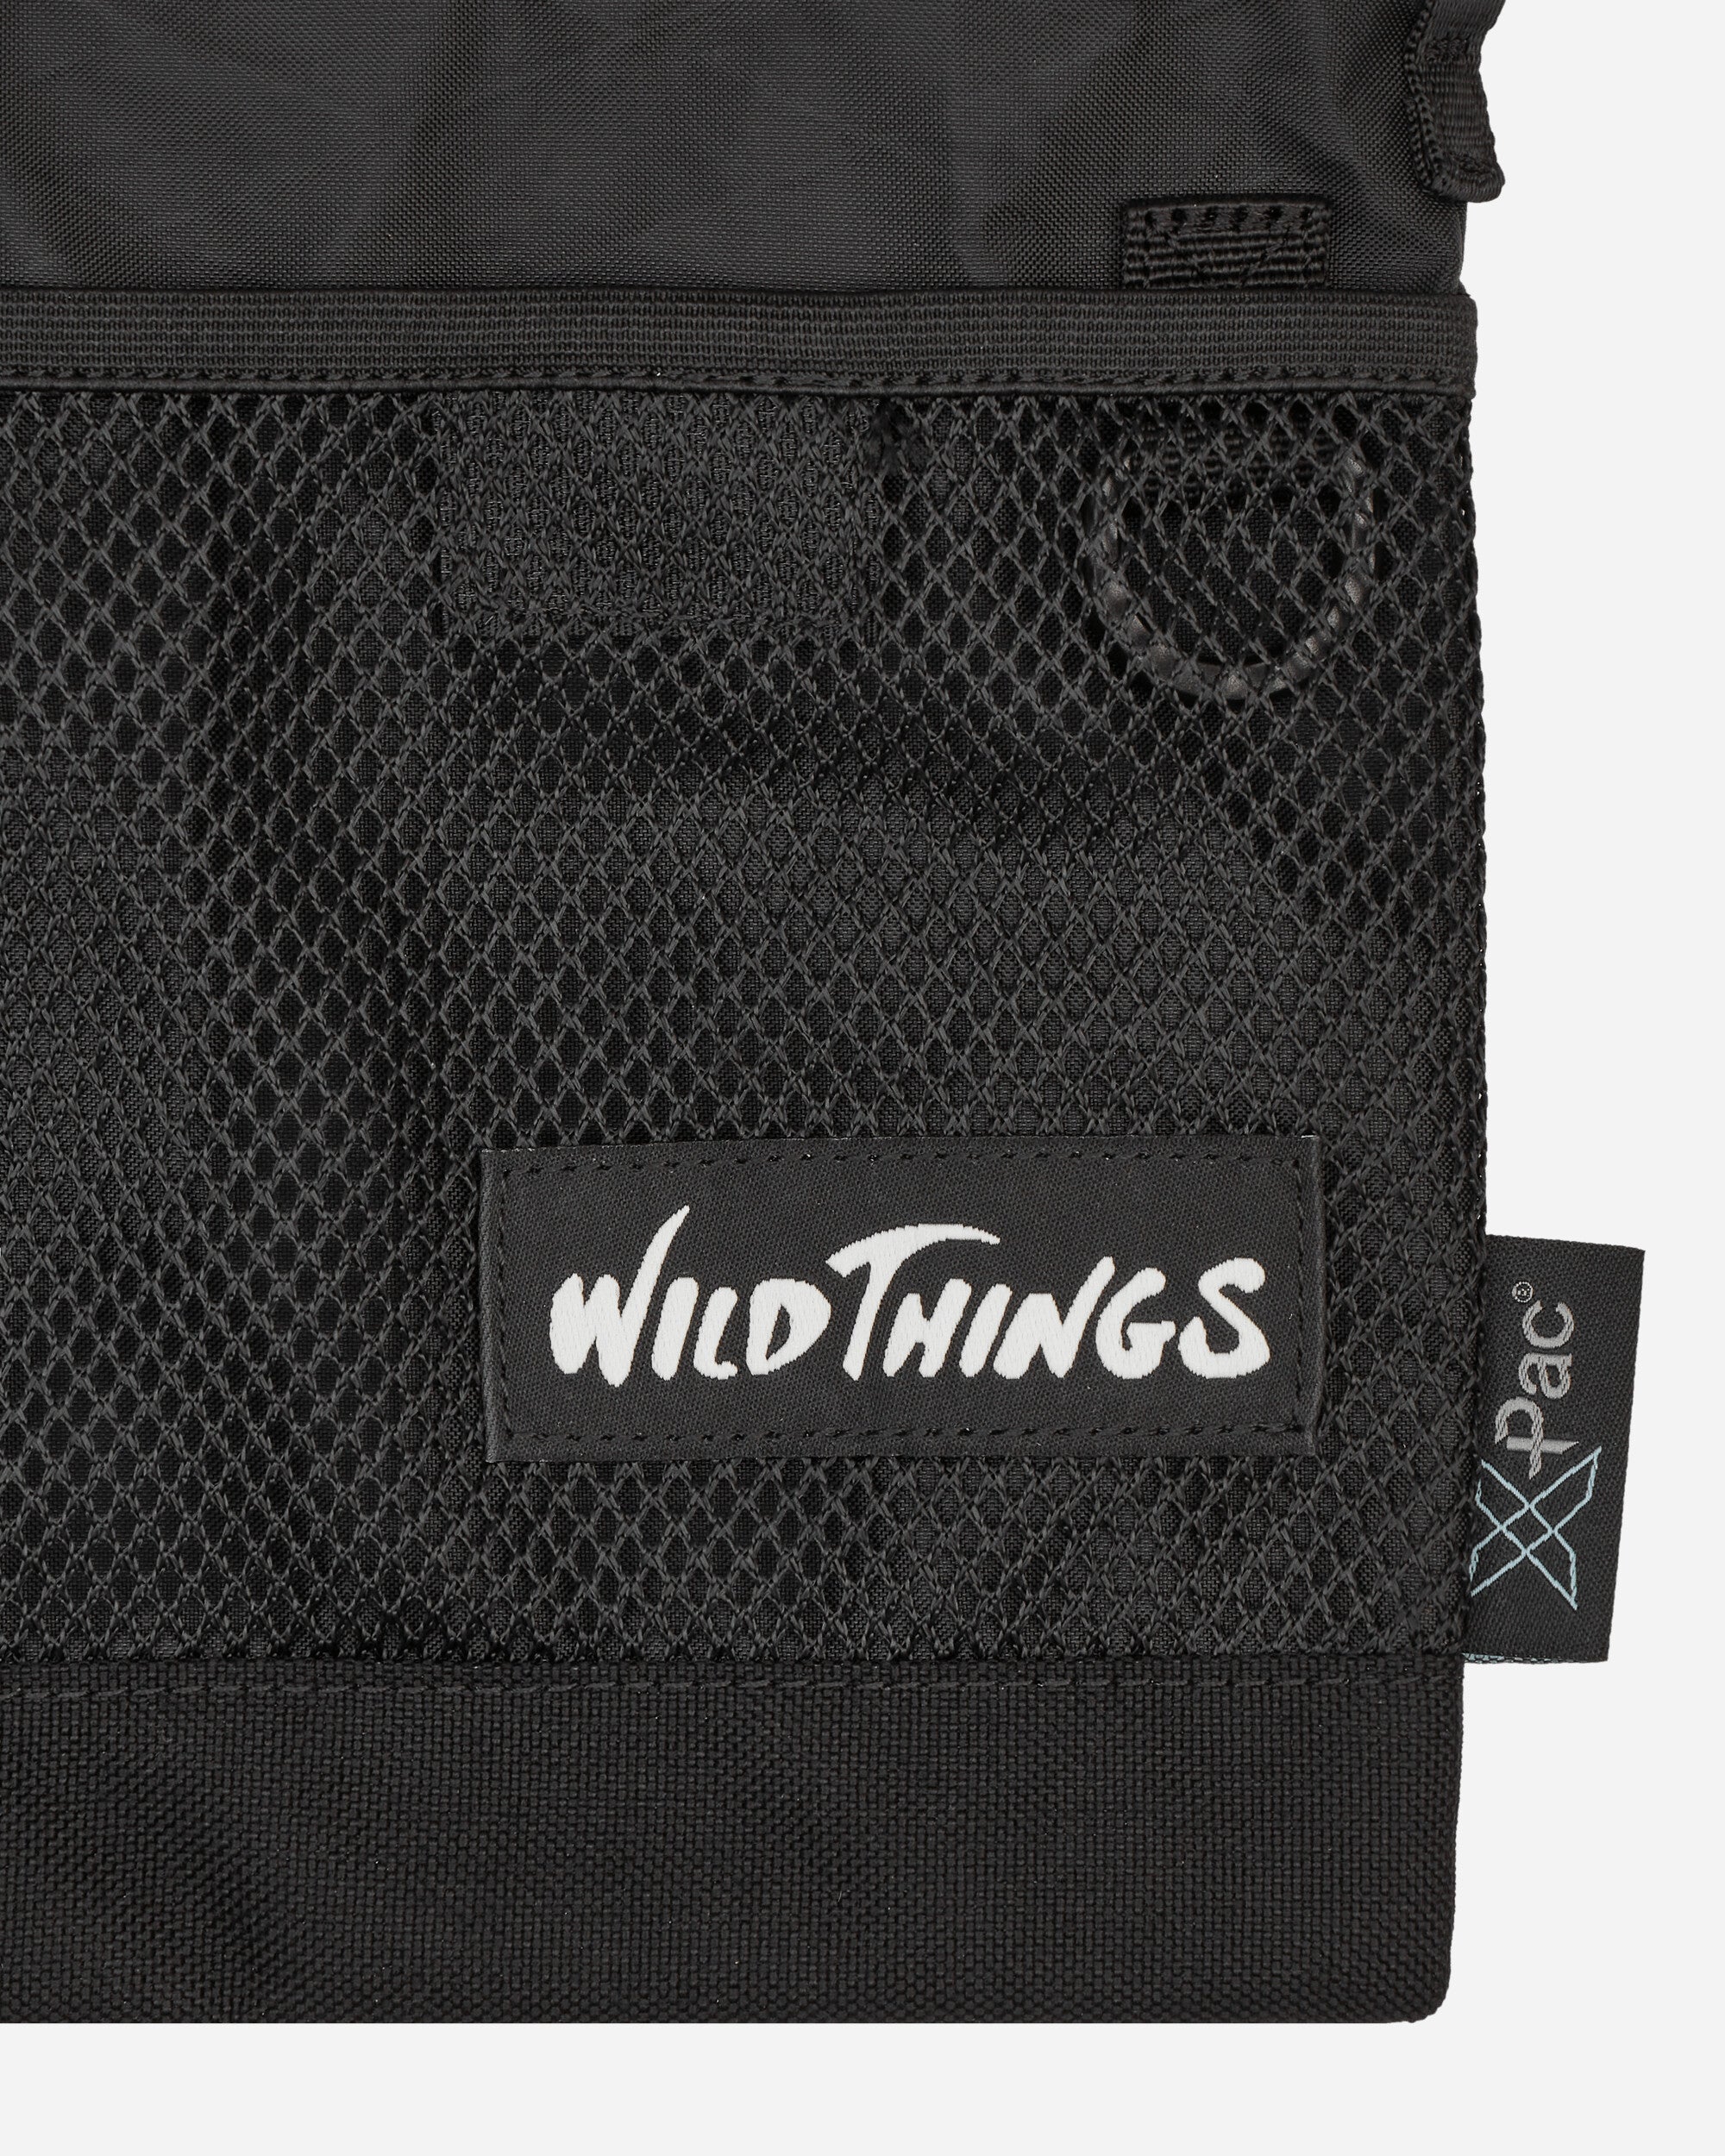 Wild Things X-Pac Sacoche Black Bags and Backpacks Pouches WT231-021 BLACK